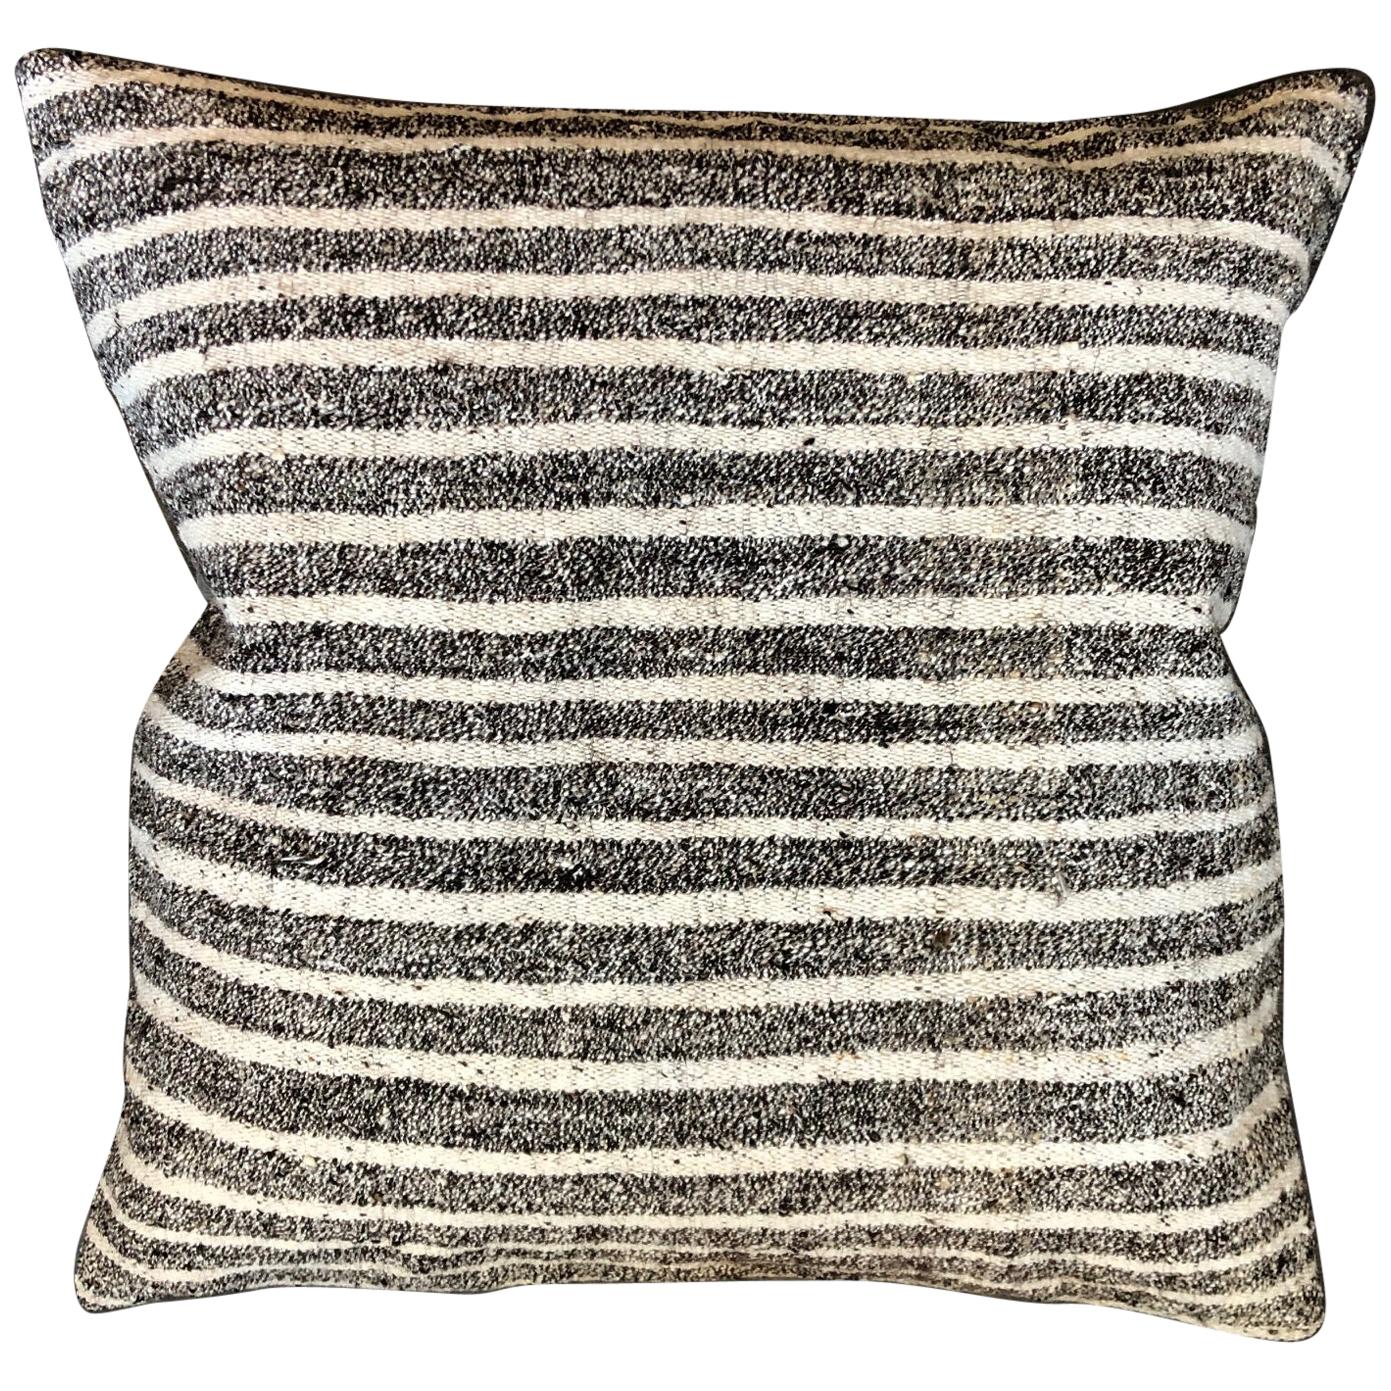 Black and White Striped Wool Pillow by Le Lampade